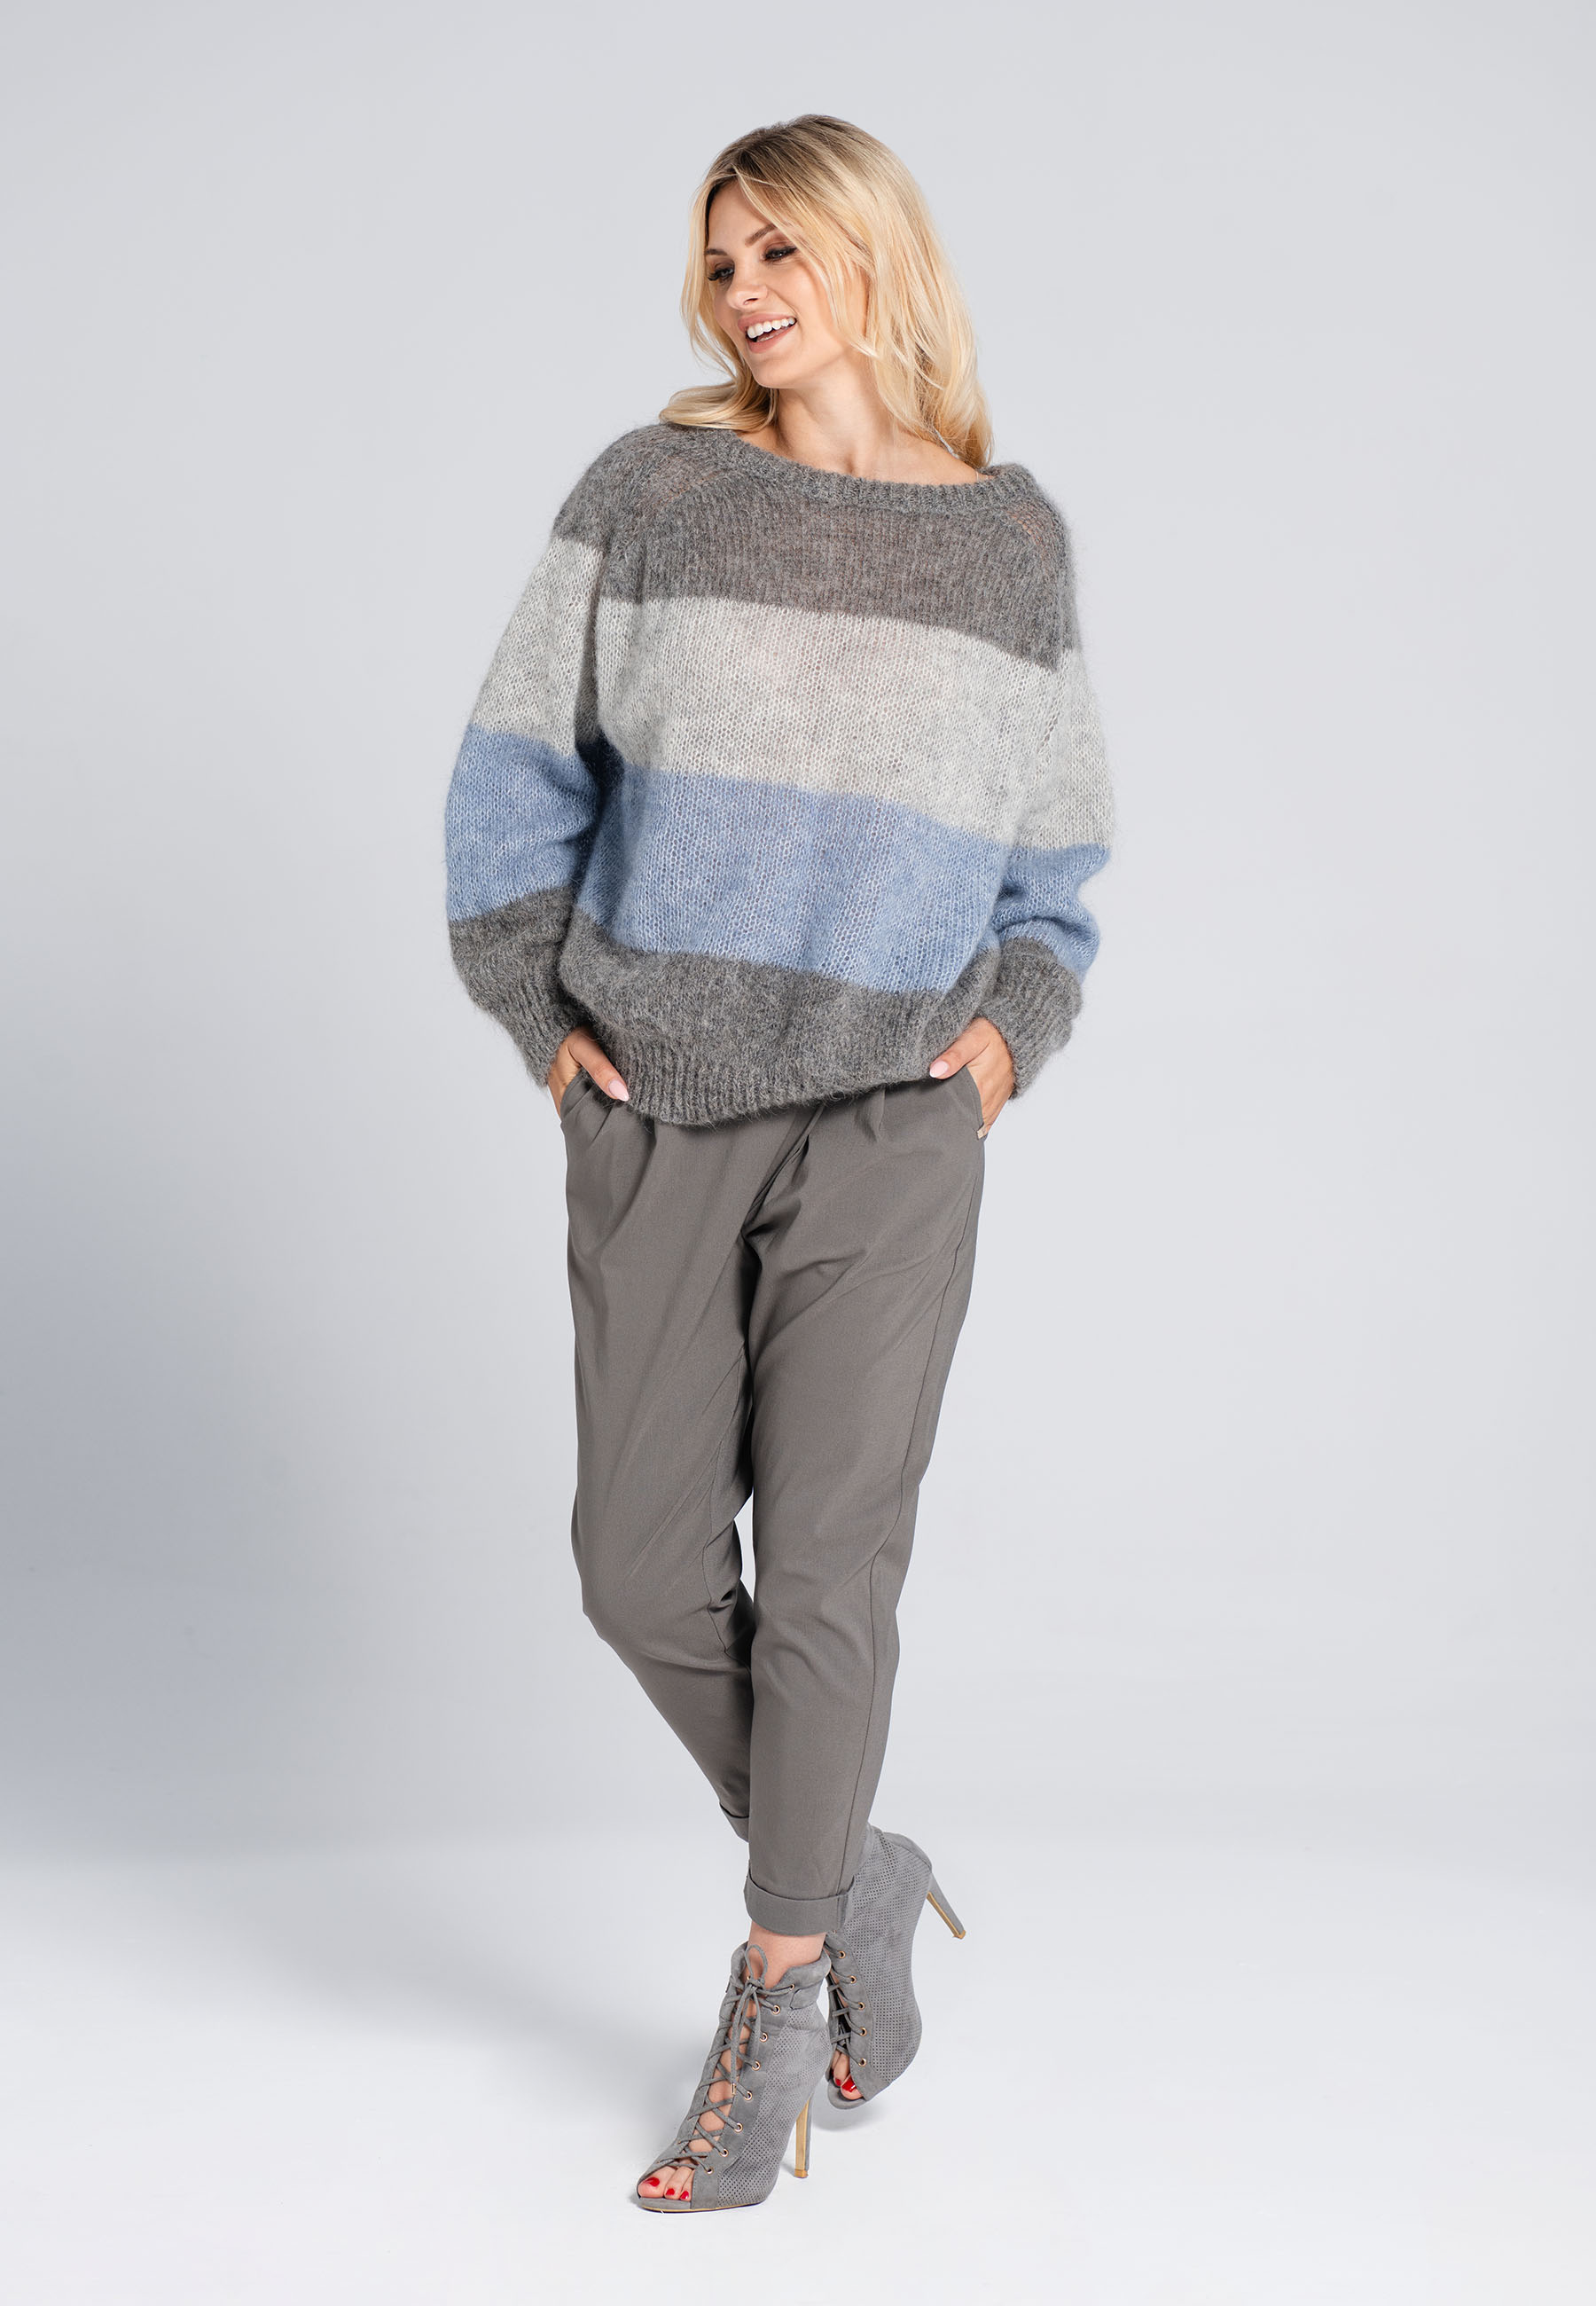 Look Made With Love Woman's Sweater M361 Blue